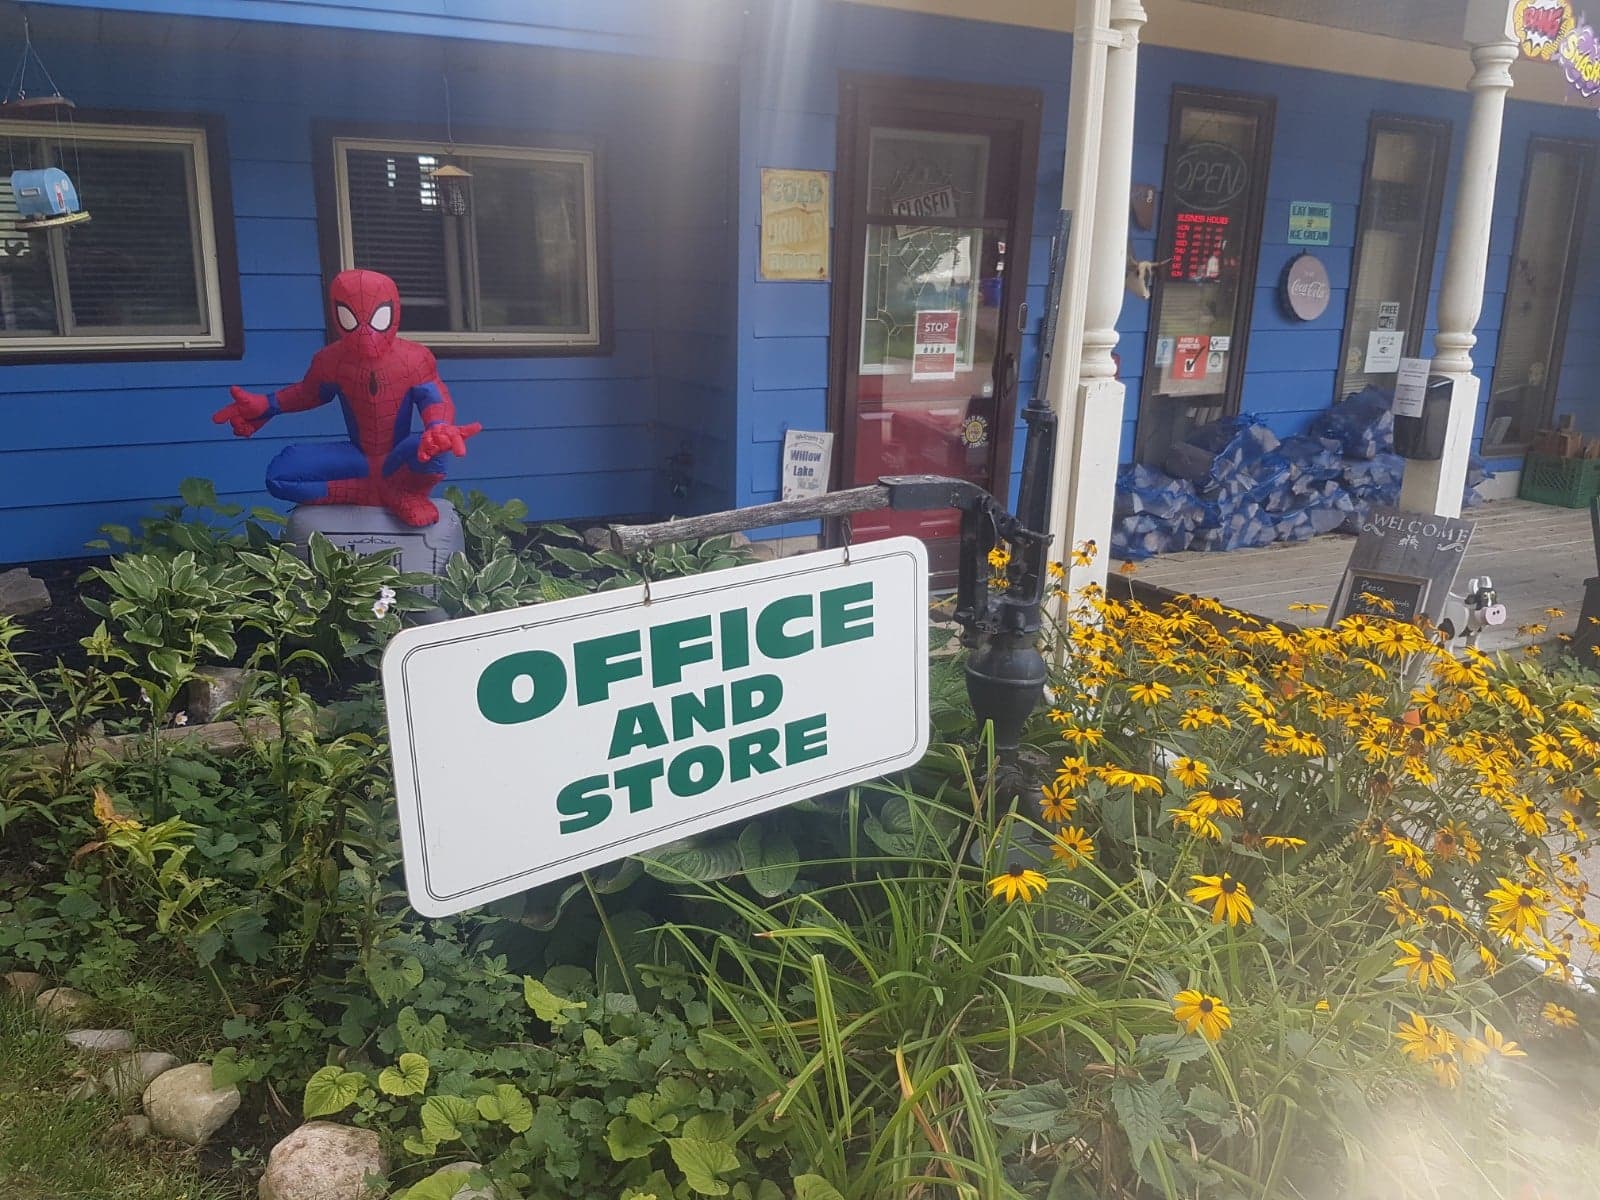 photo of person dressed as spiderman outside of the camp office and store